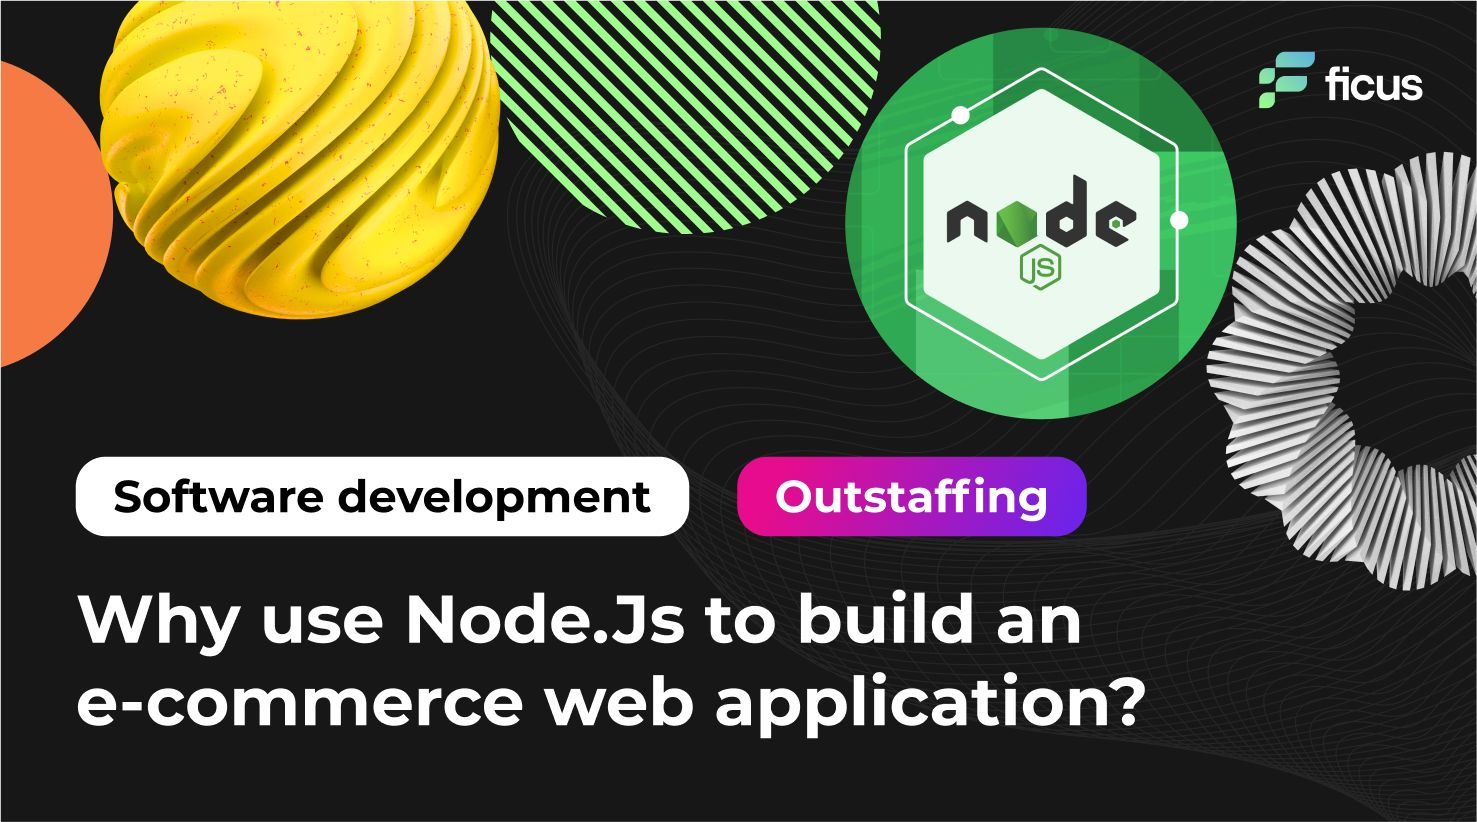 Why use Node.Js to build an e-commerce web application?